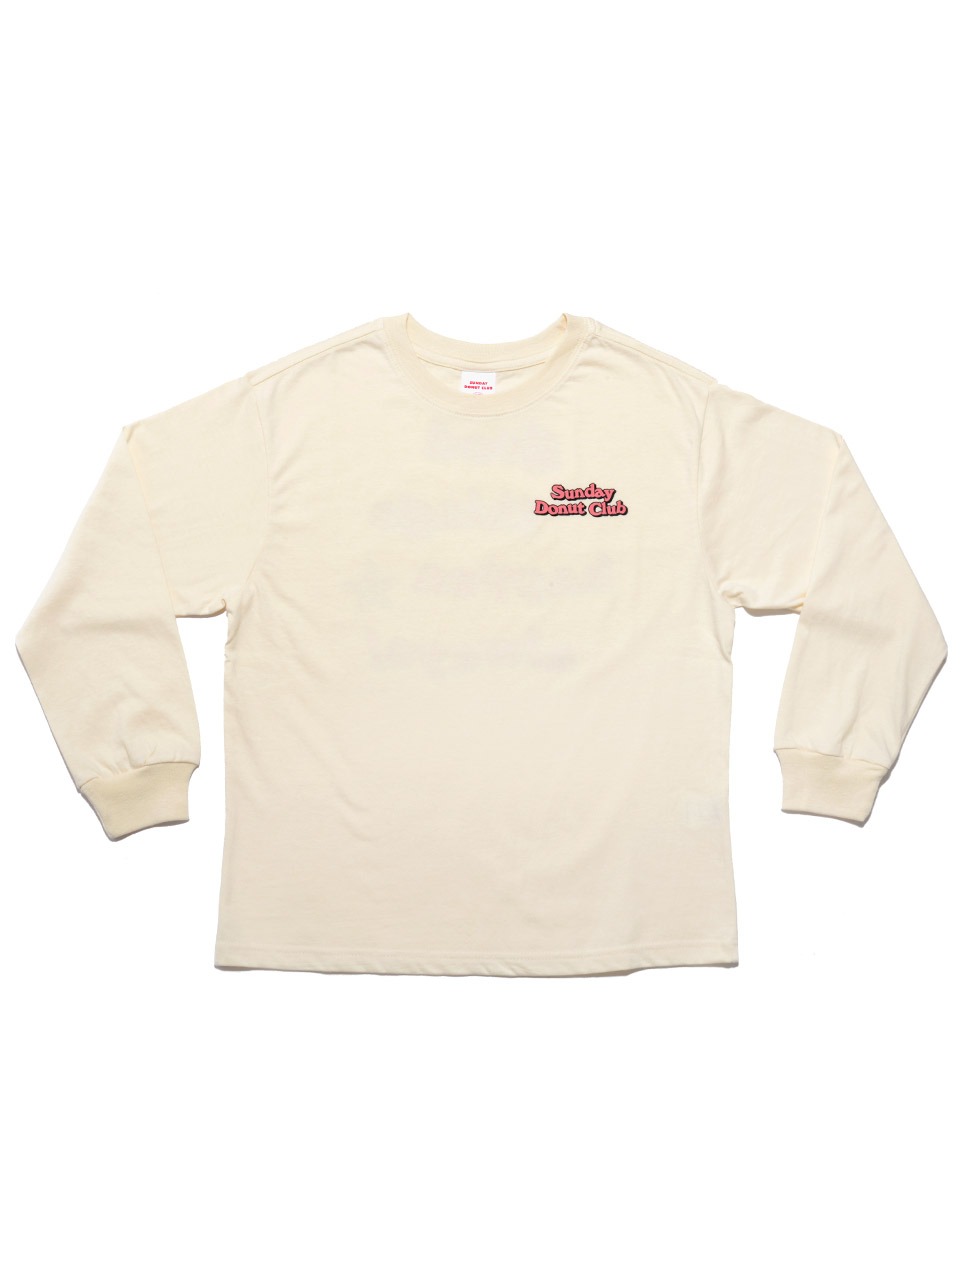 GOOD THINGS L/S TEE [Butter]